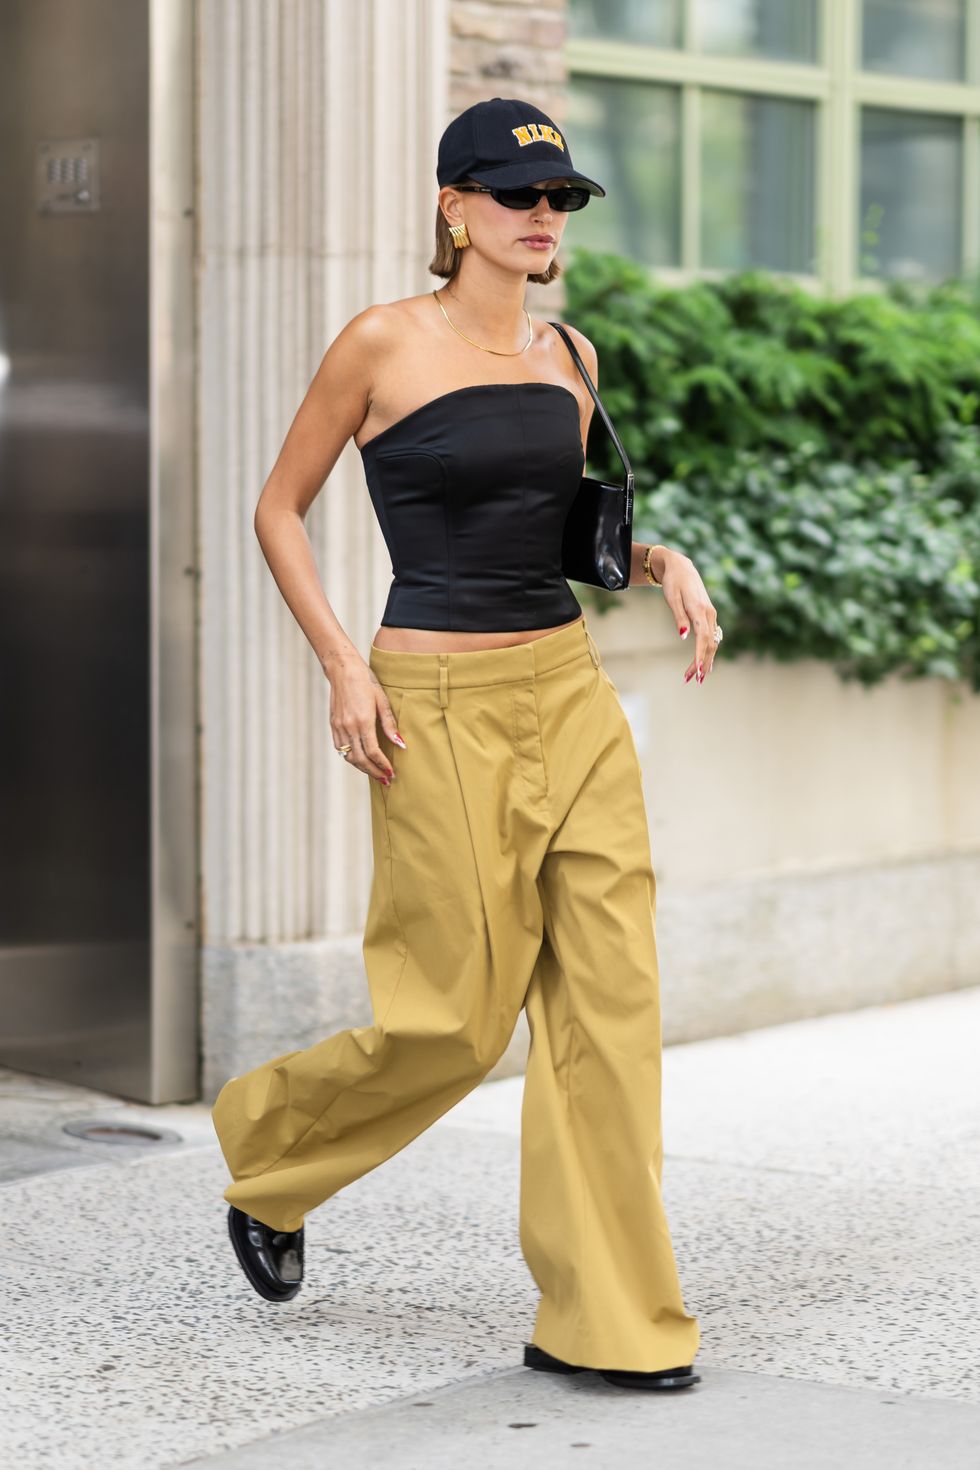 06152023 exclusive hailey bieber is pictured stepping out in new york city the american supermodel wore a nike baseball cap, black corset top, mustard yellow trousers, and black loafers salestheimagedirectcom please bylinetheimagedirectcomexclusive please email salestheimagedirectcom for fees before use